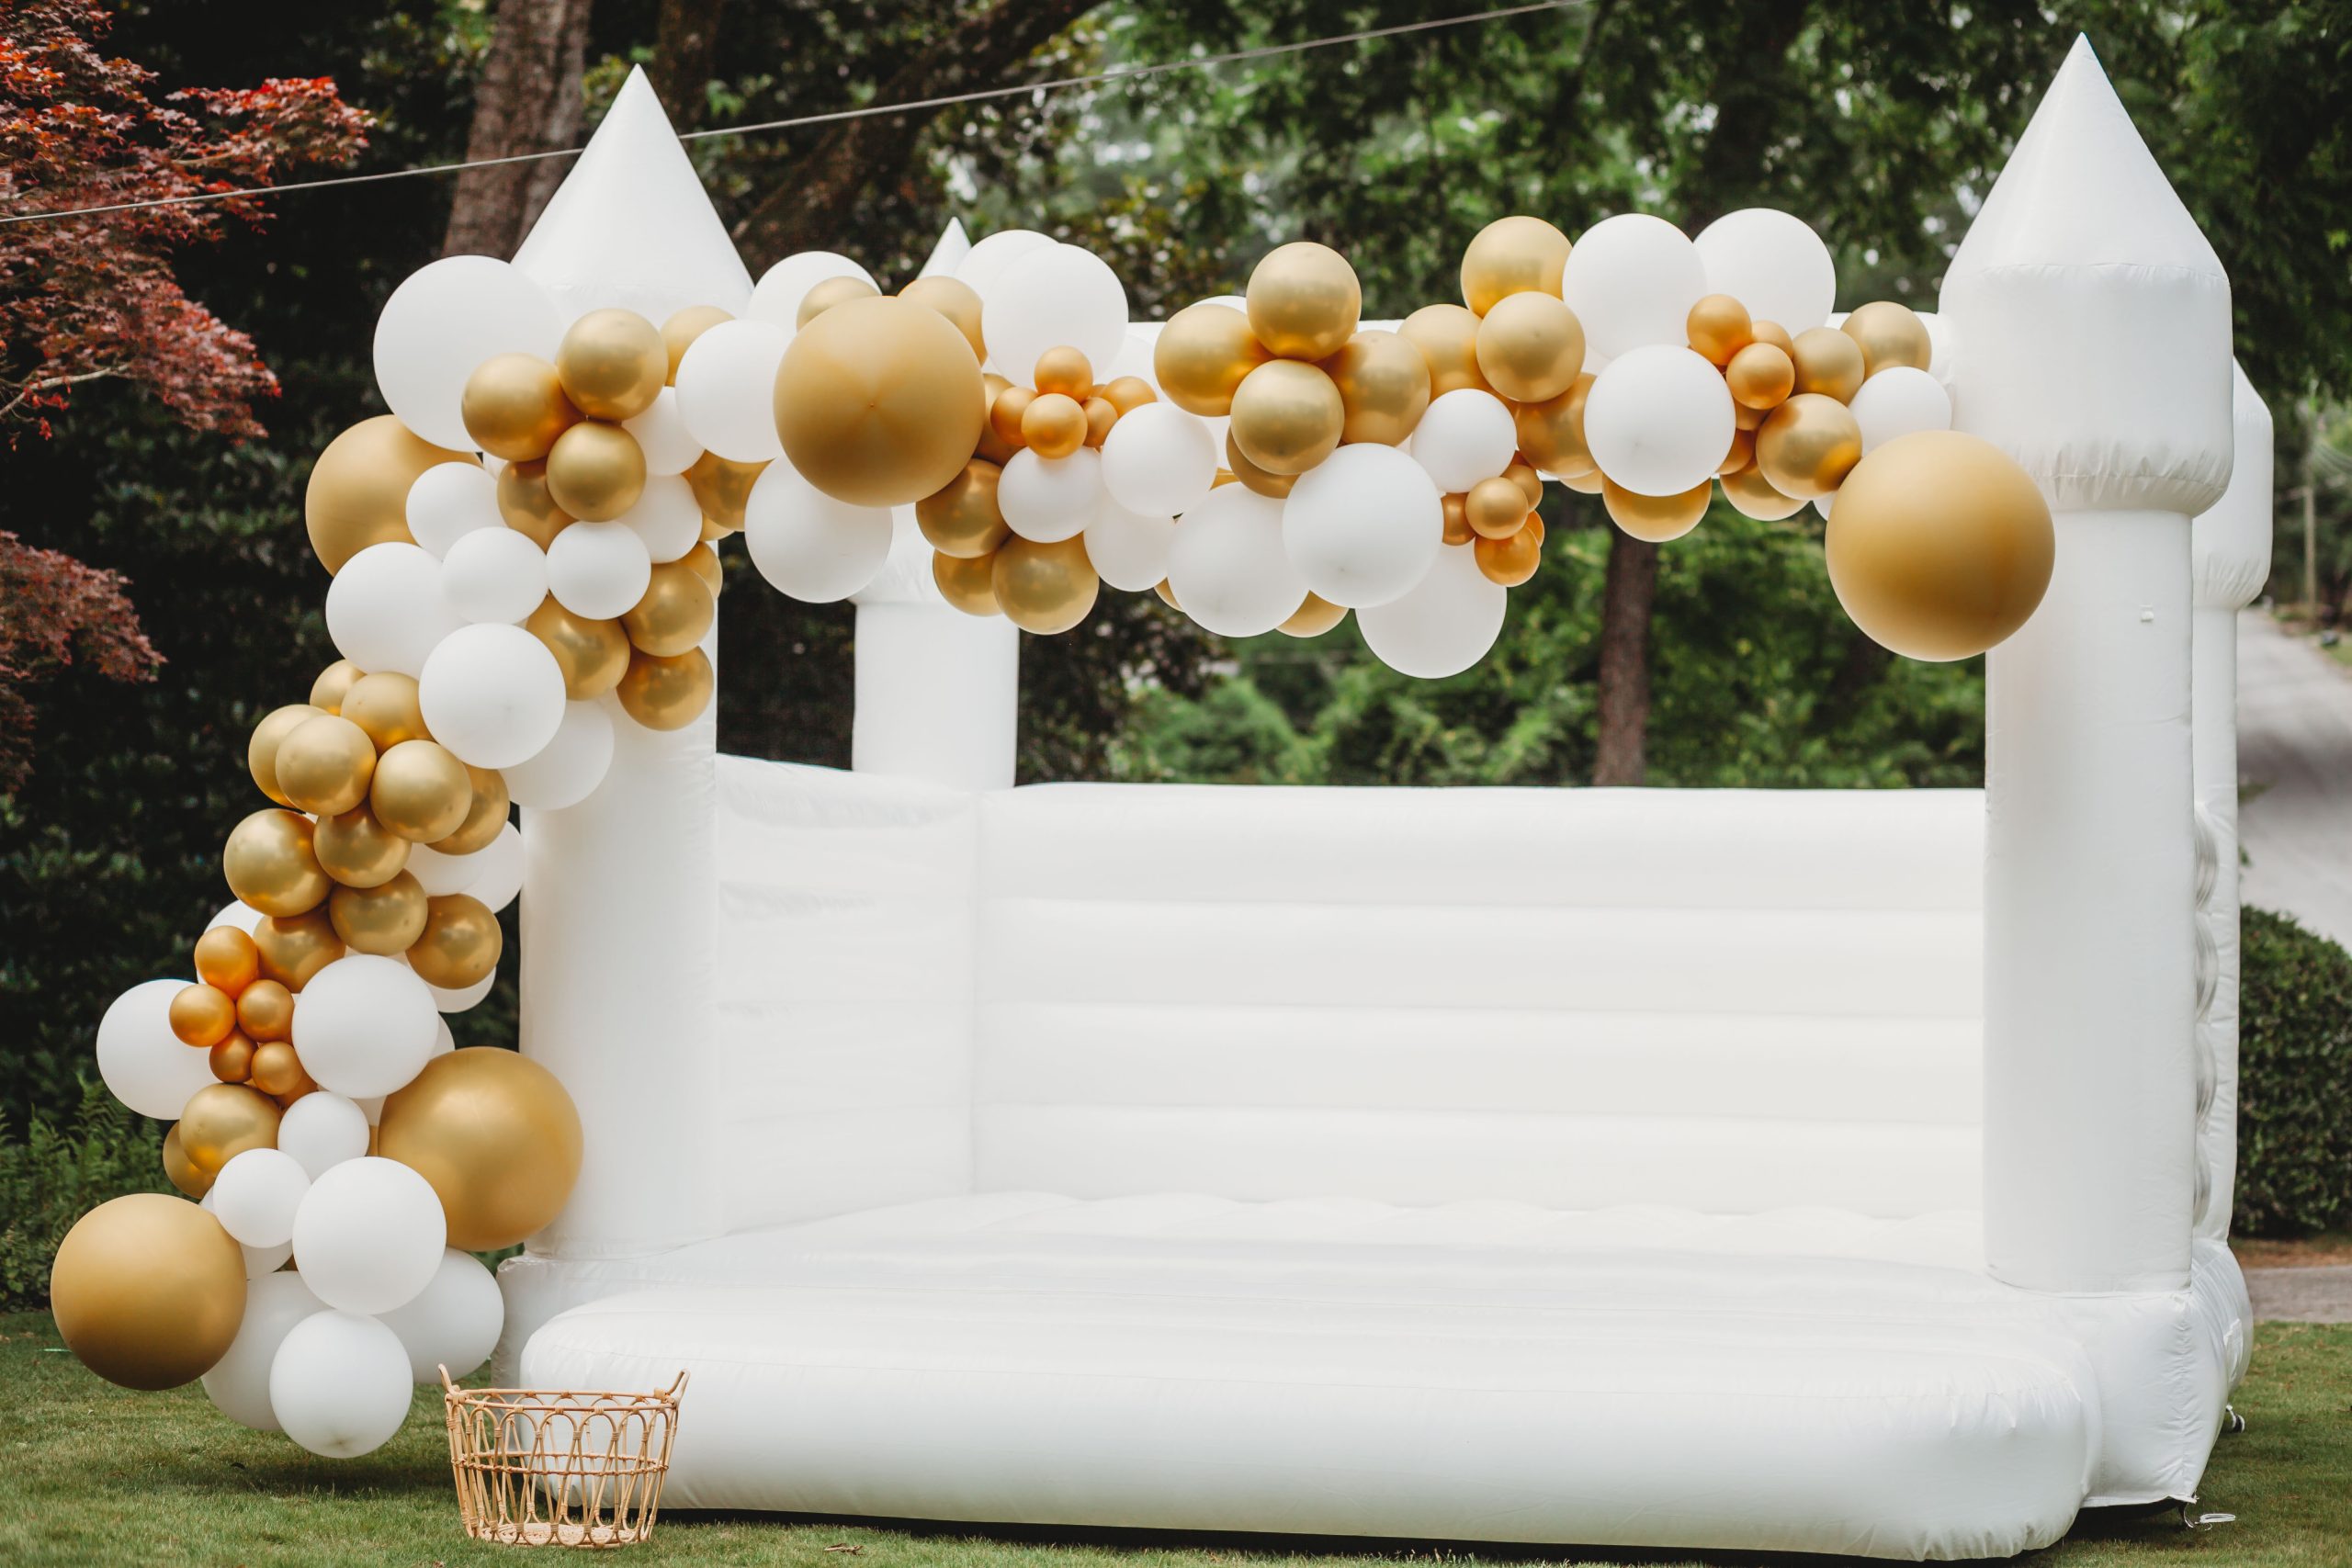 Top 5 Reasons Why Renting a White Bounce House Will Make Your Event Unforgettable